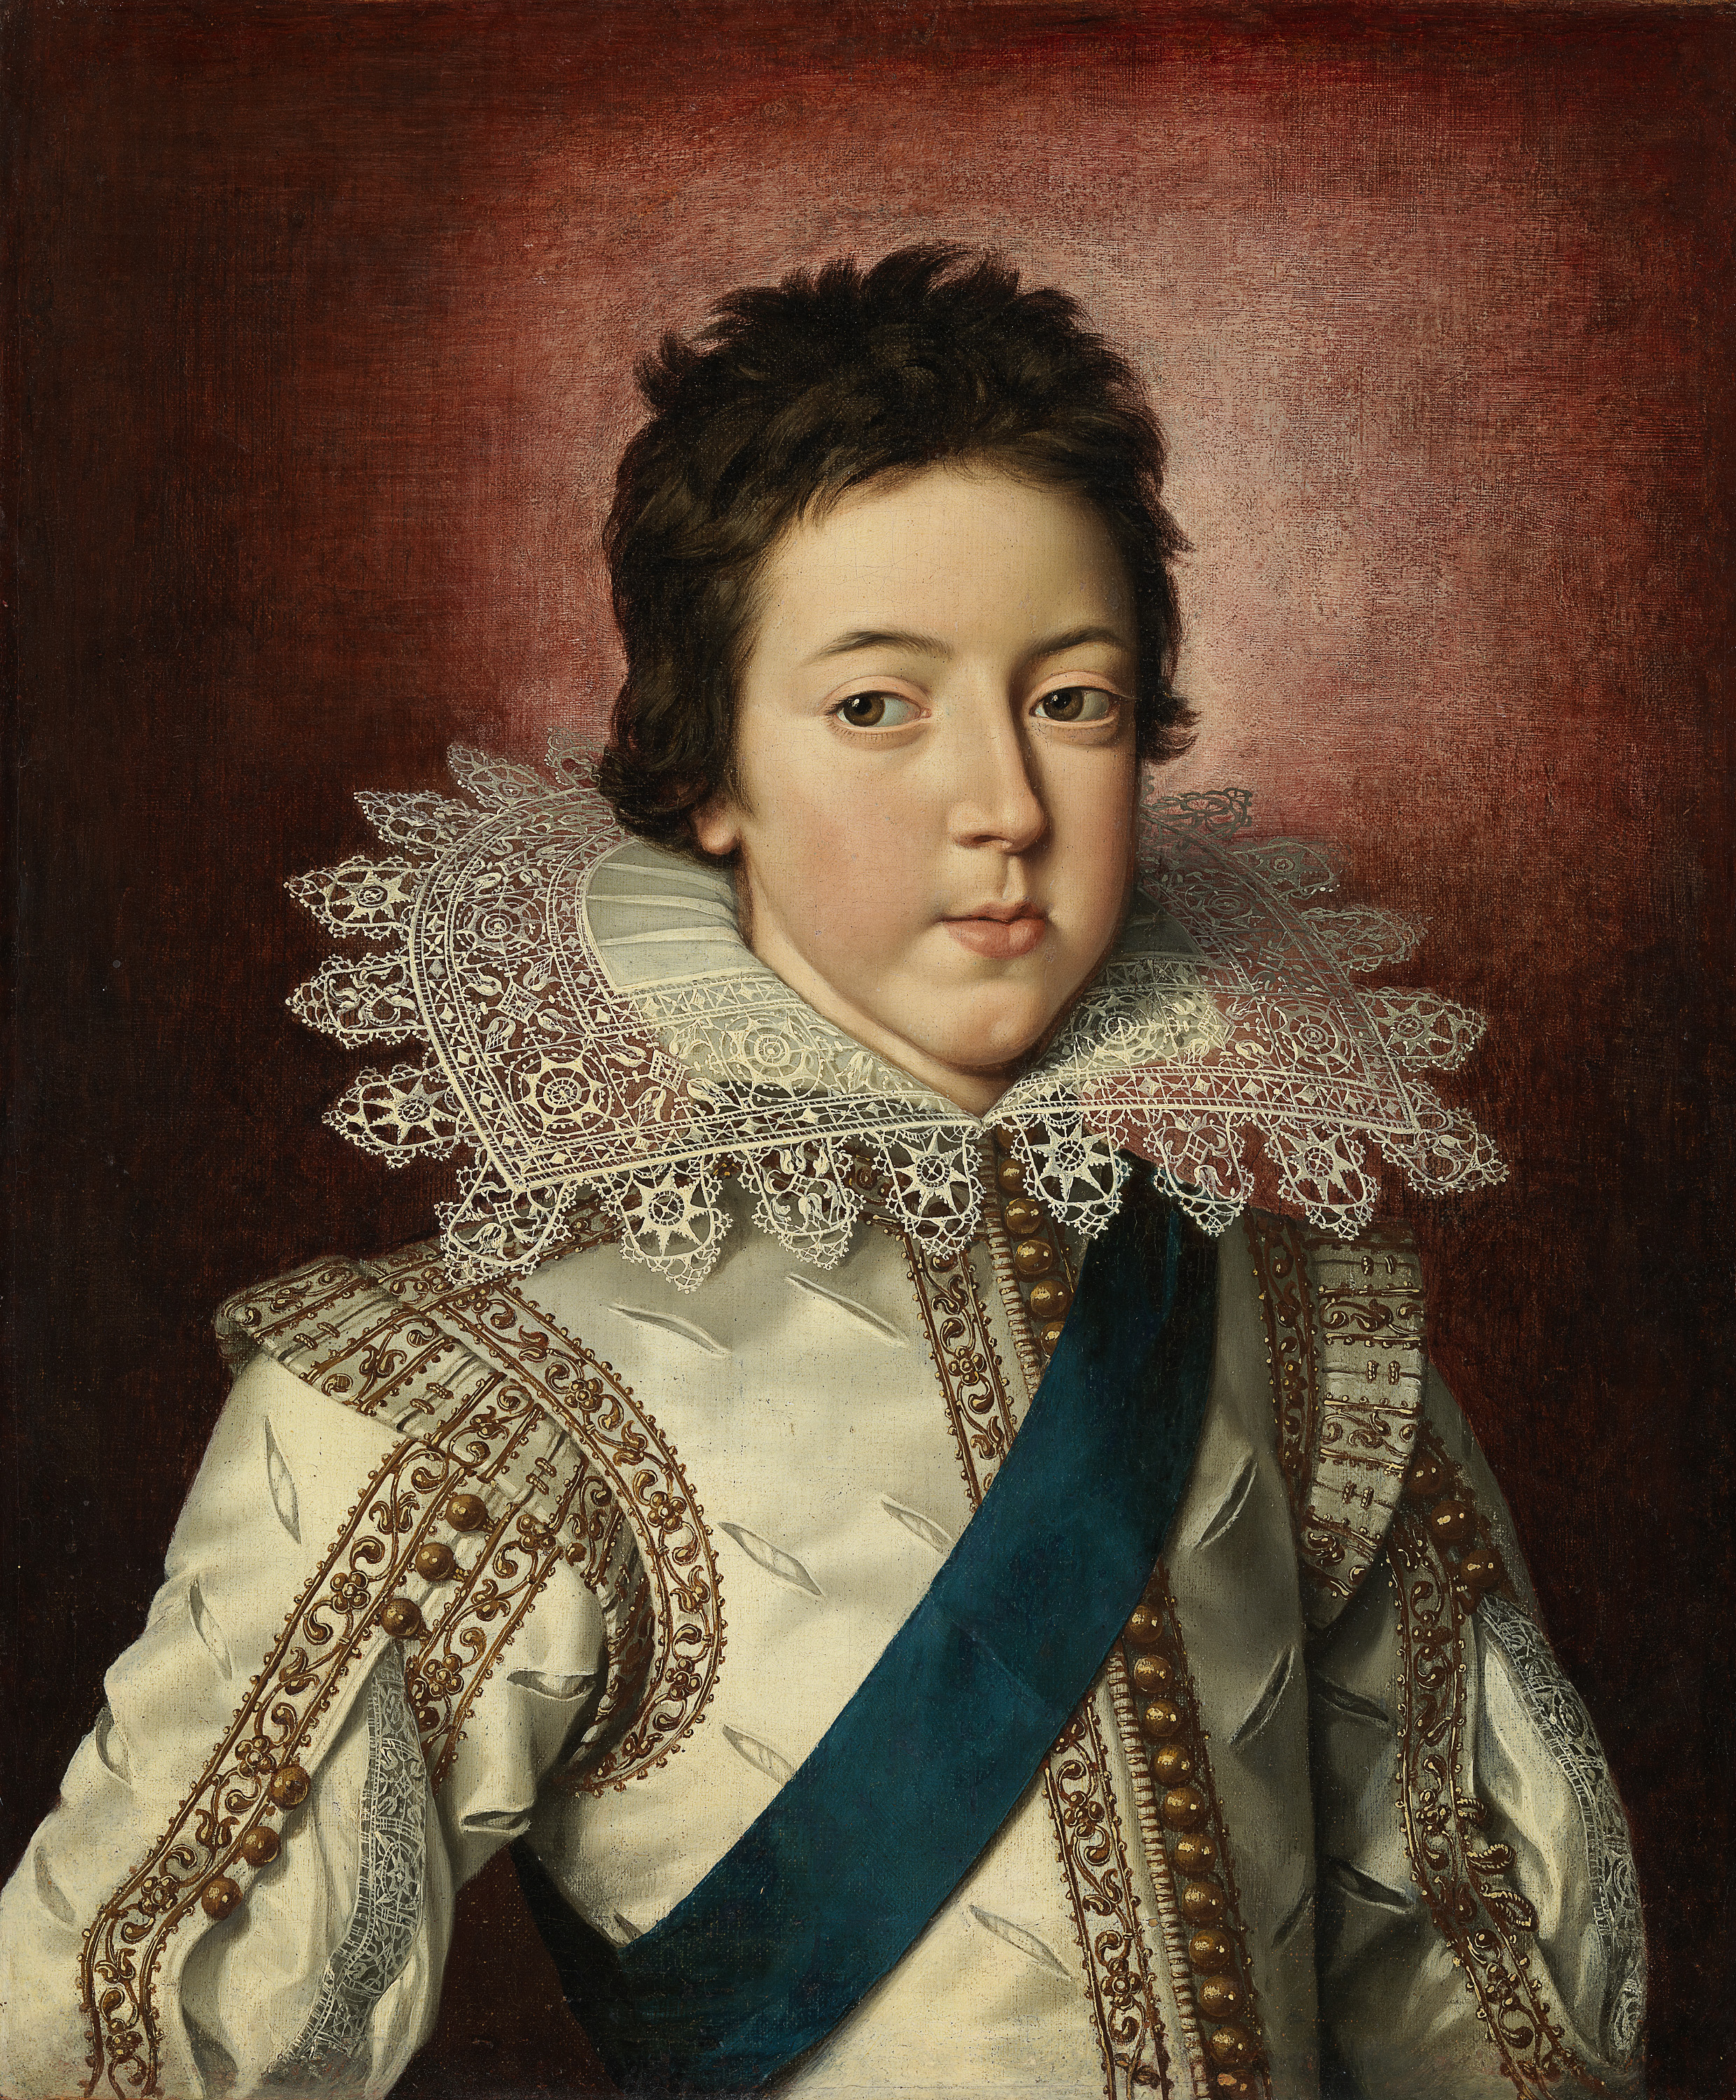 A 17th century Flemish baroque portrait of a boy in a ruffle, looking serious and to the side